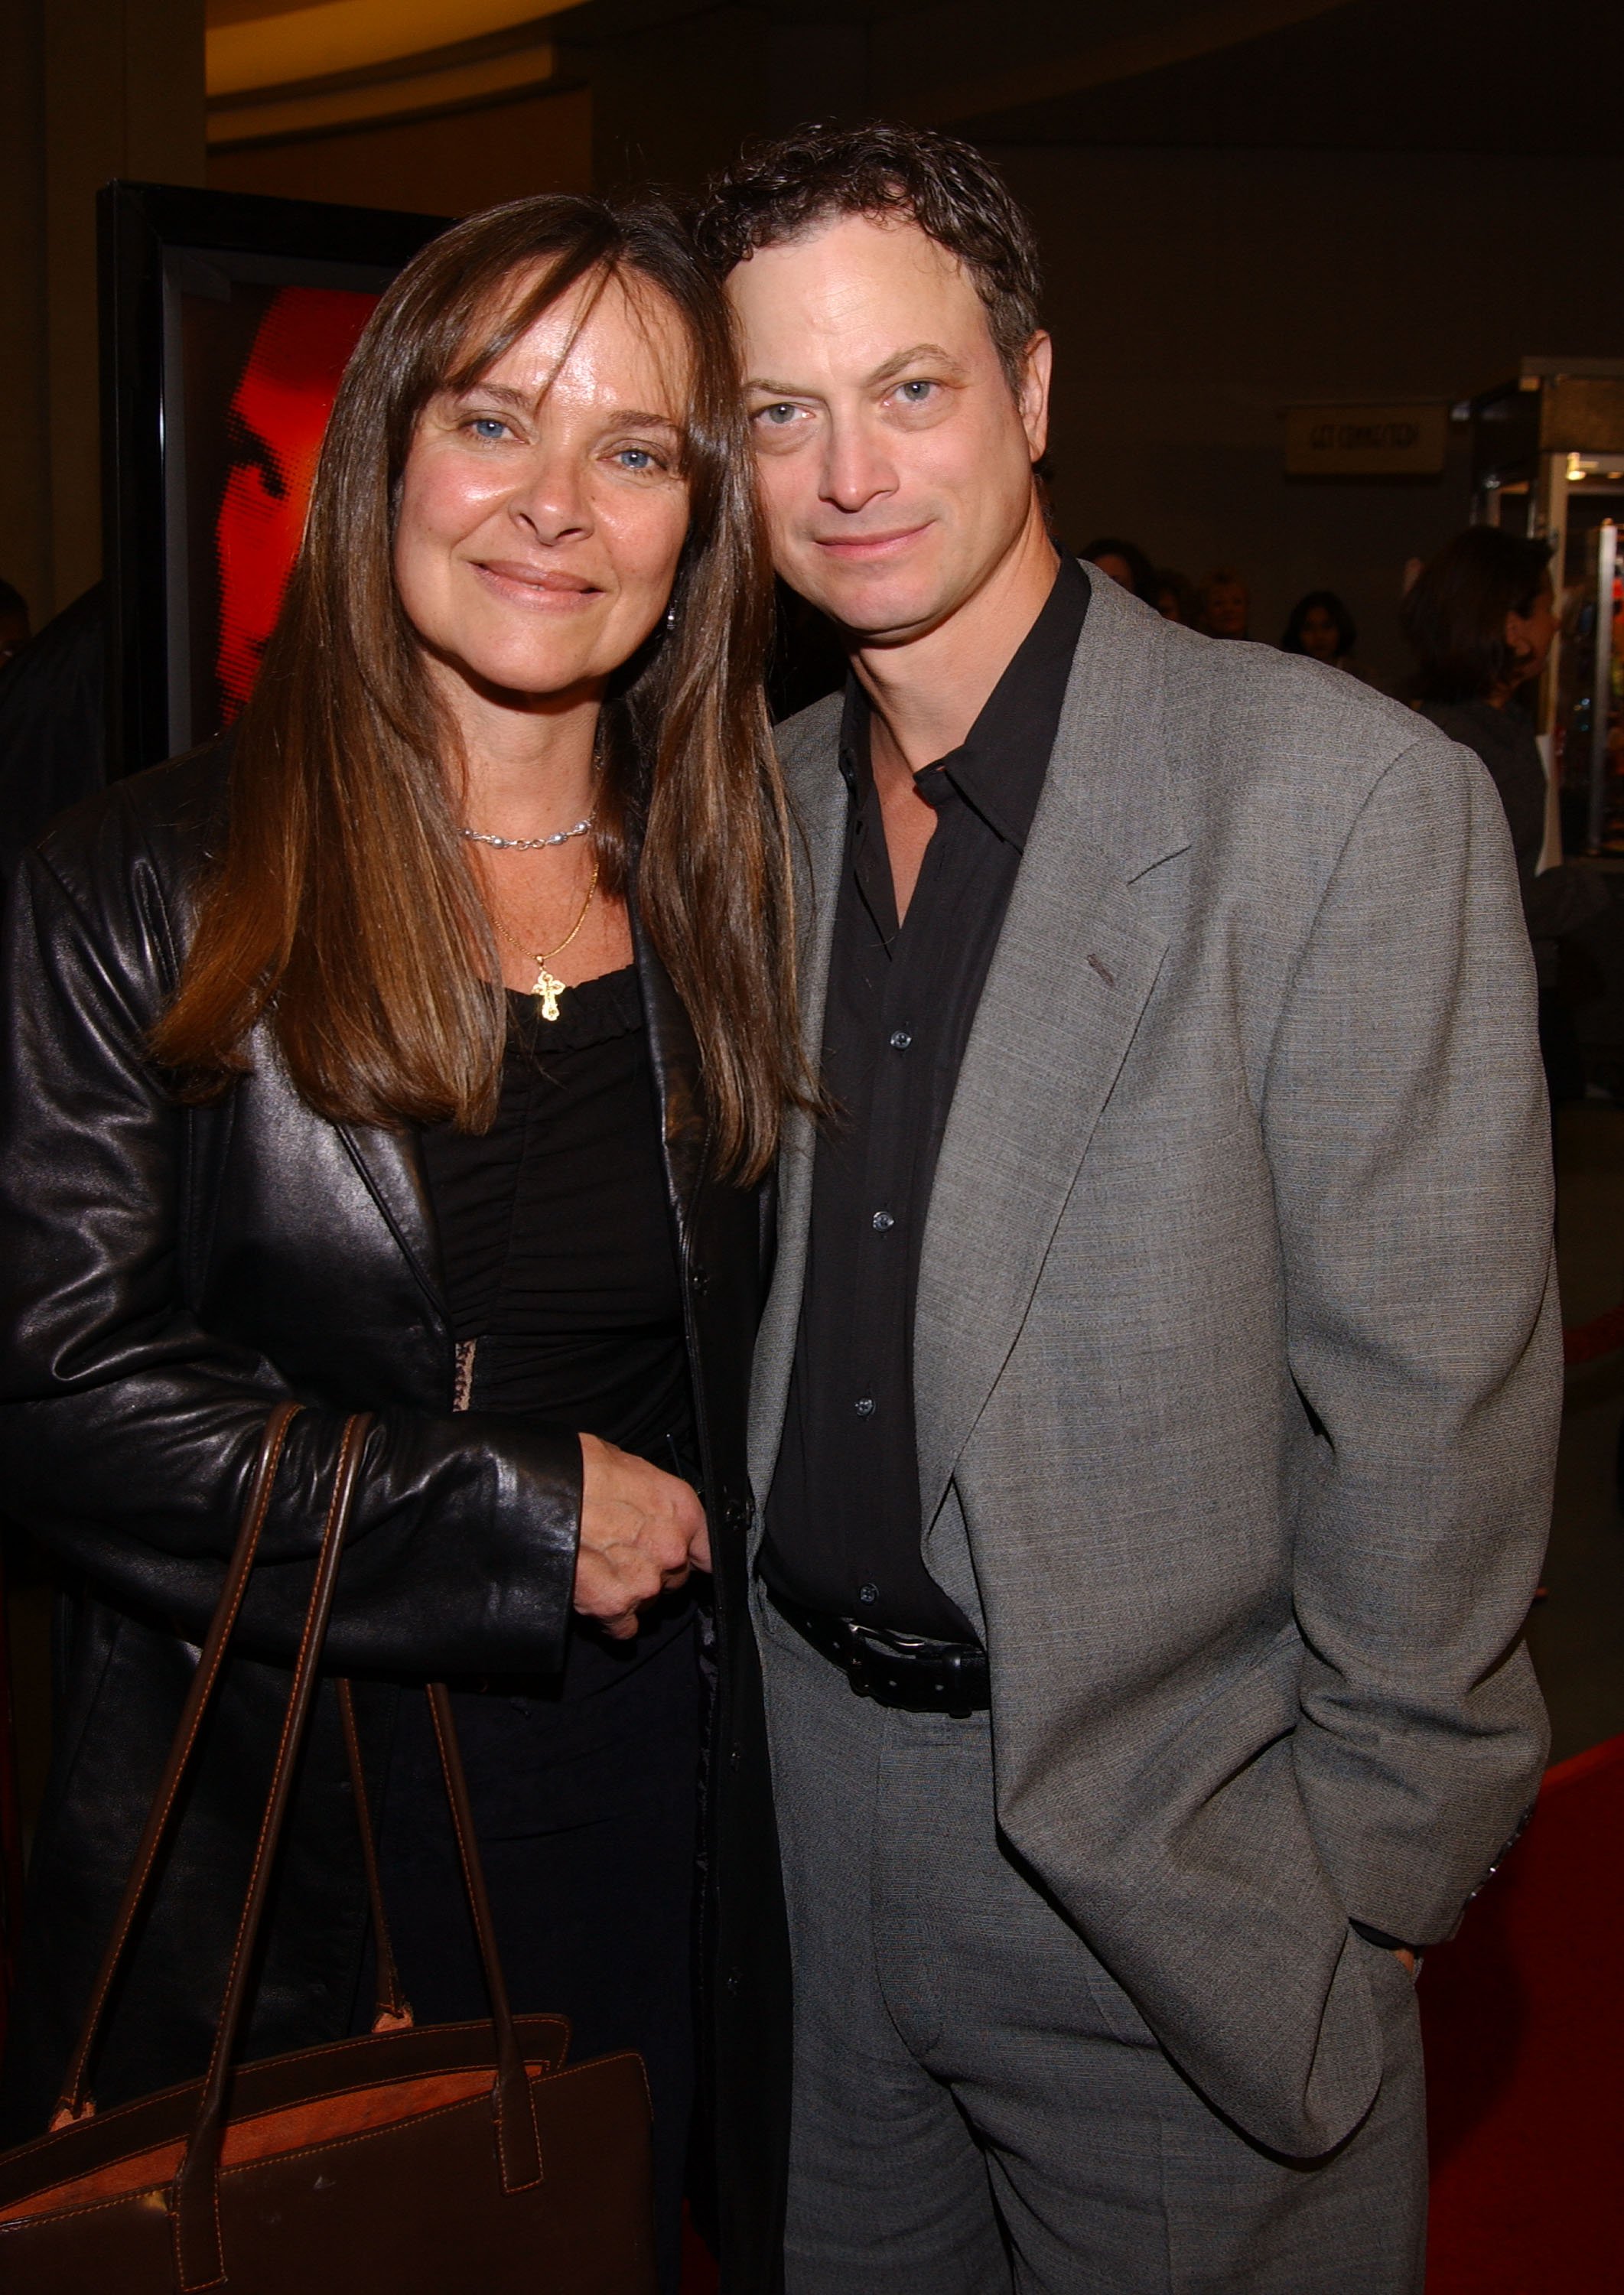 Gary Sinise and wife Moira Harris on January 24, 2002 in Los Angeles, California. | Source: Getty Images